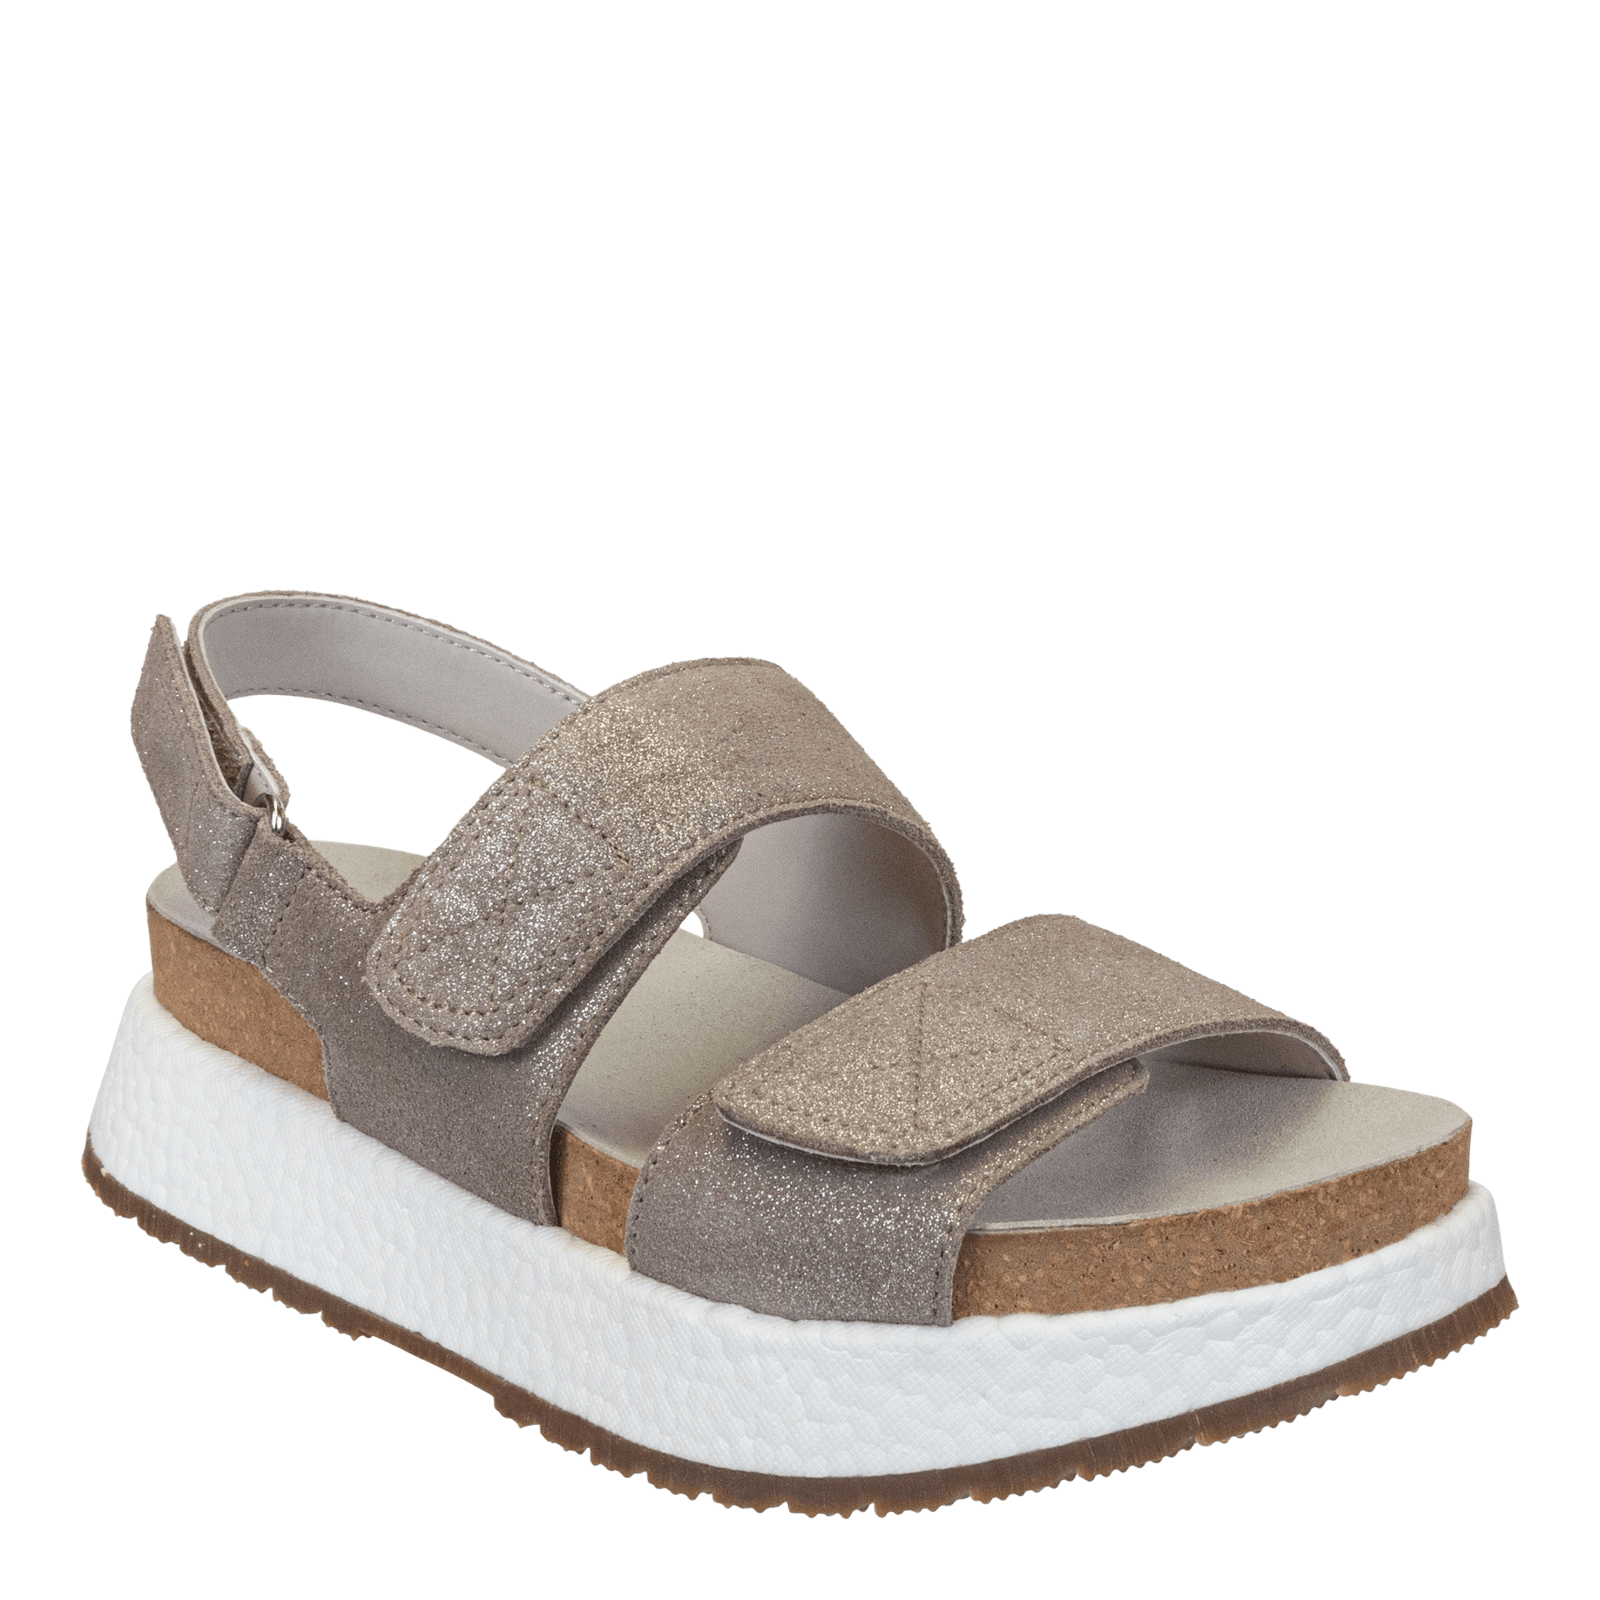 OTBT - FLUENT in SILVER Wedge Sandals - Knitted Belle Boutique